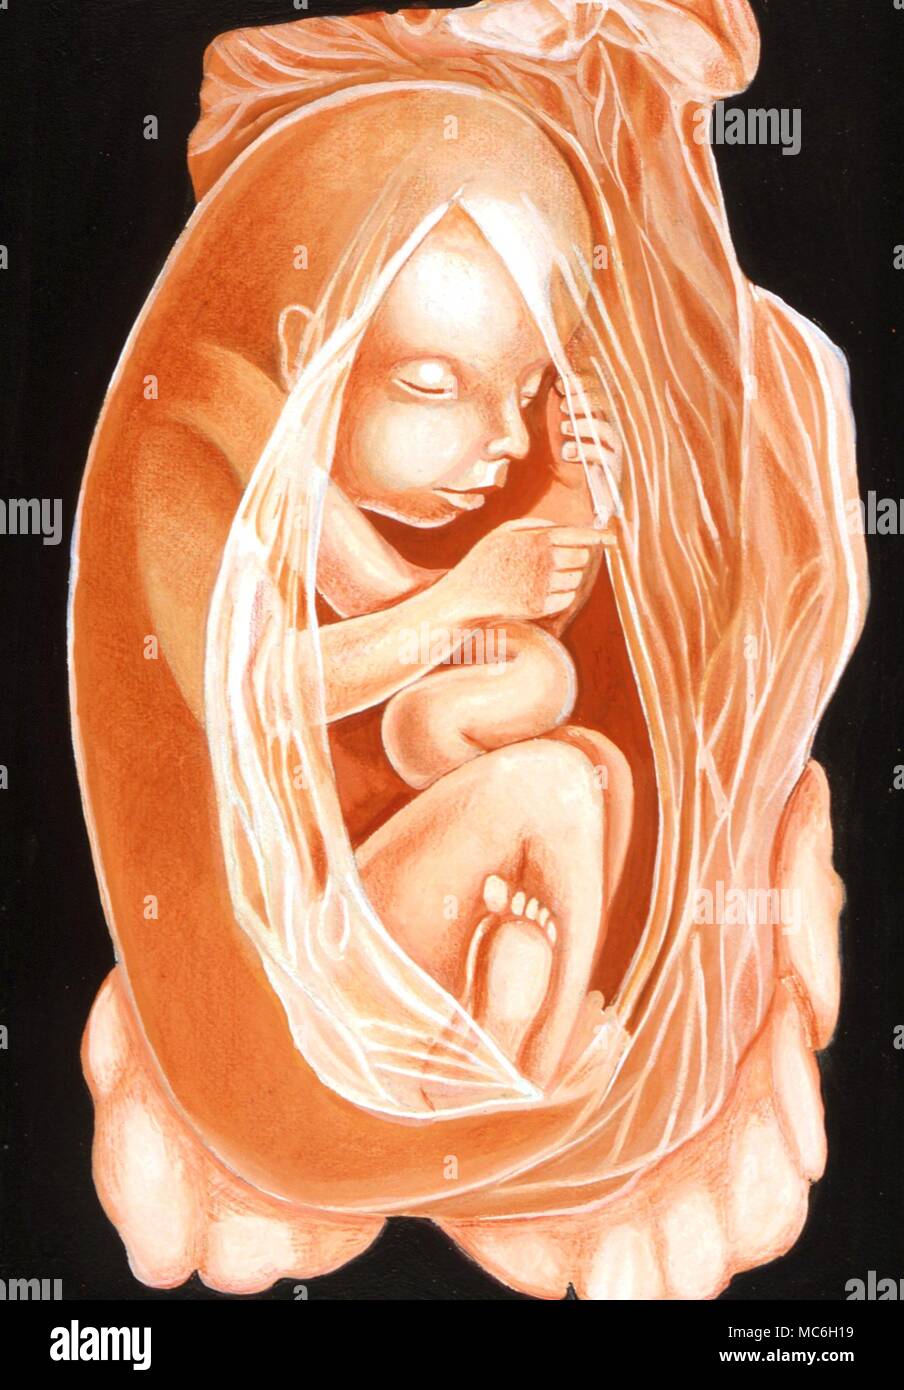 Embryo in womb - detail from artwork based on a 19th century print Stock Photo